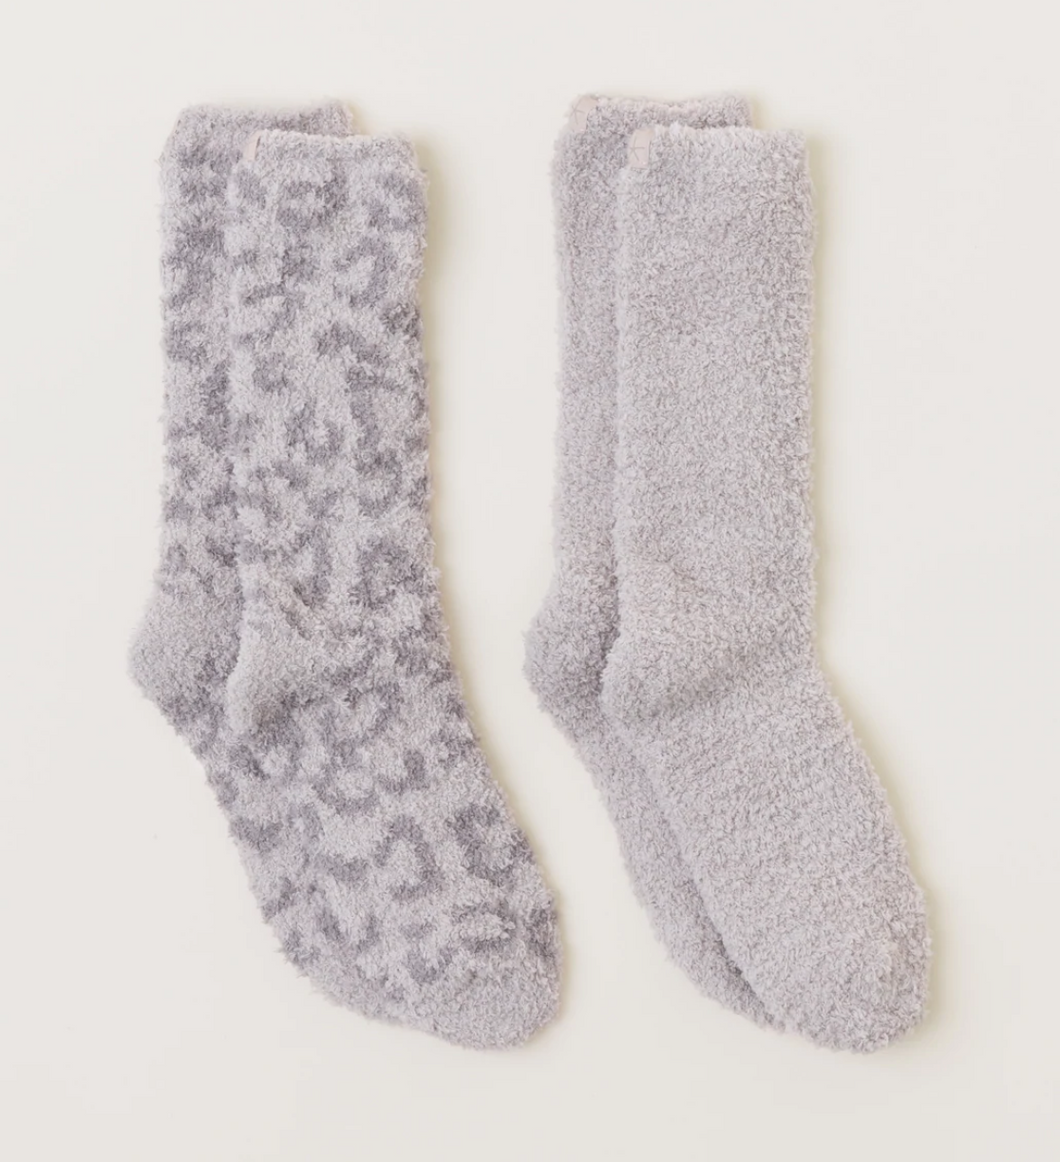 CozyChic Women's Barefoot in the Wild 2 Pair Sock Set - Linen and Warm Grey